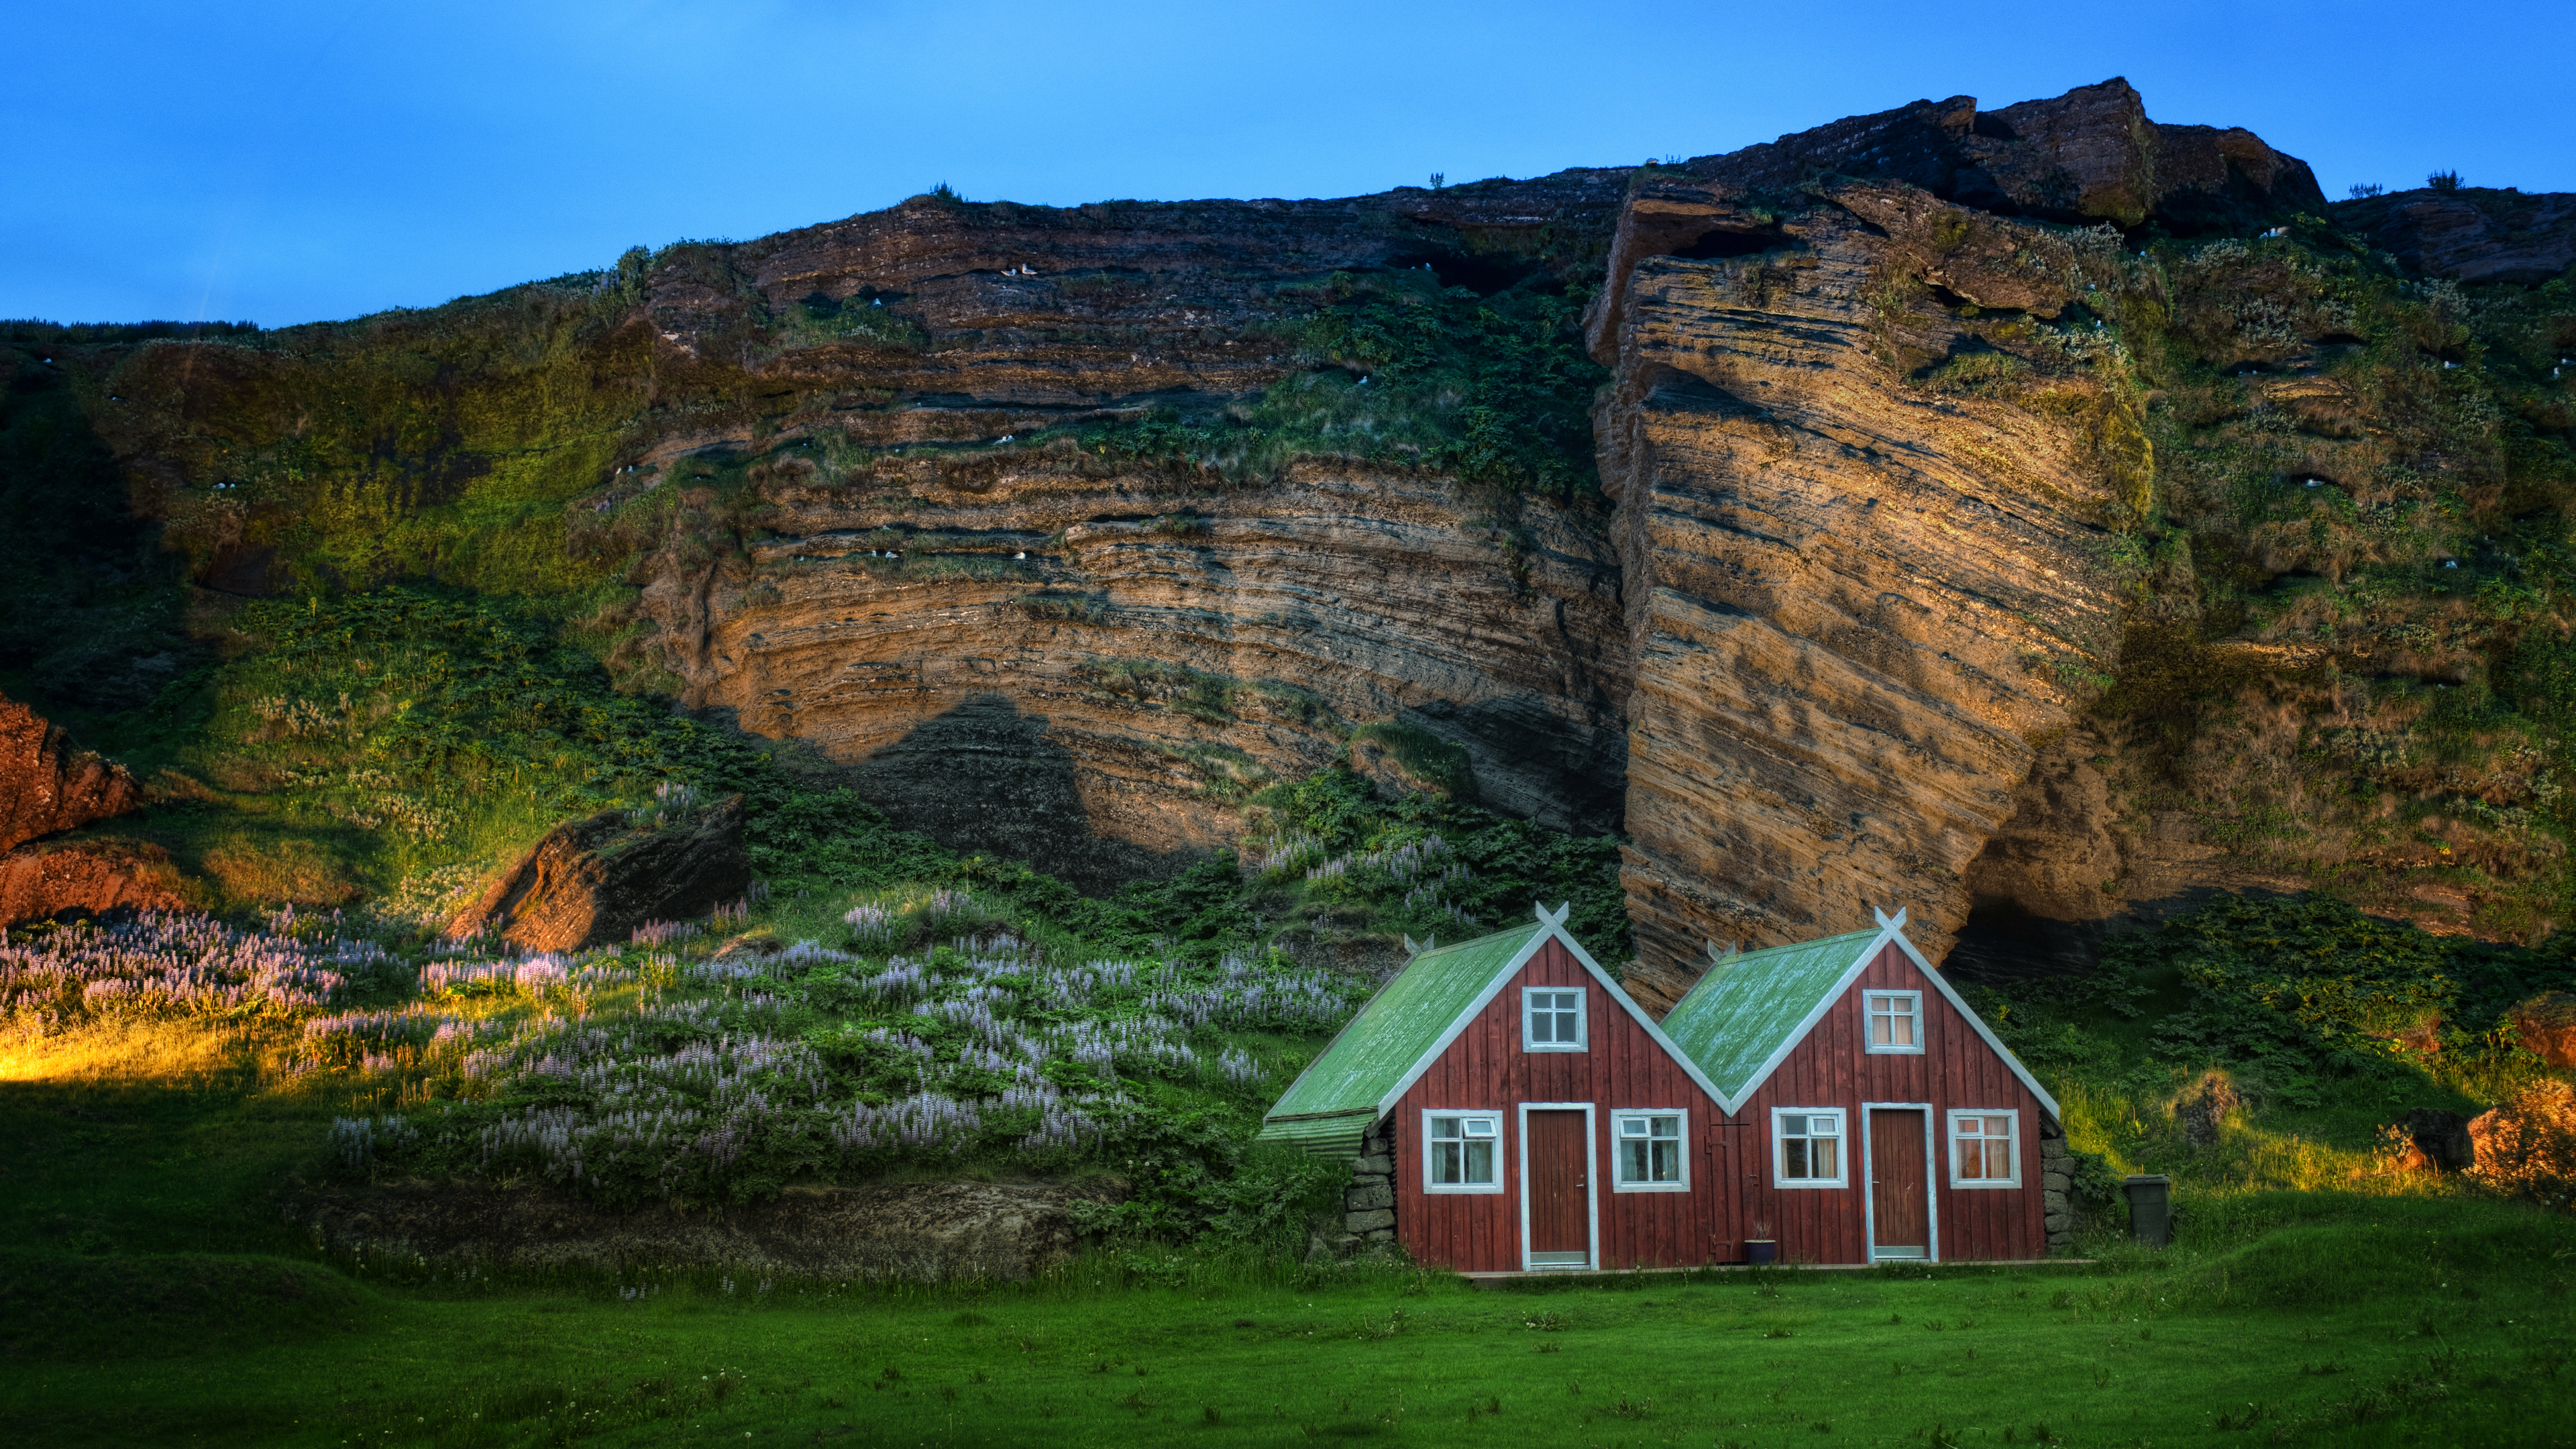 General 3840x2160 landscape Iceland Trey Ratcliff photography nature rocks wall house grass flowers